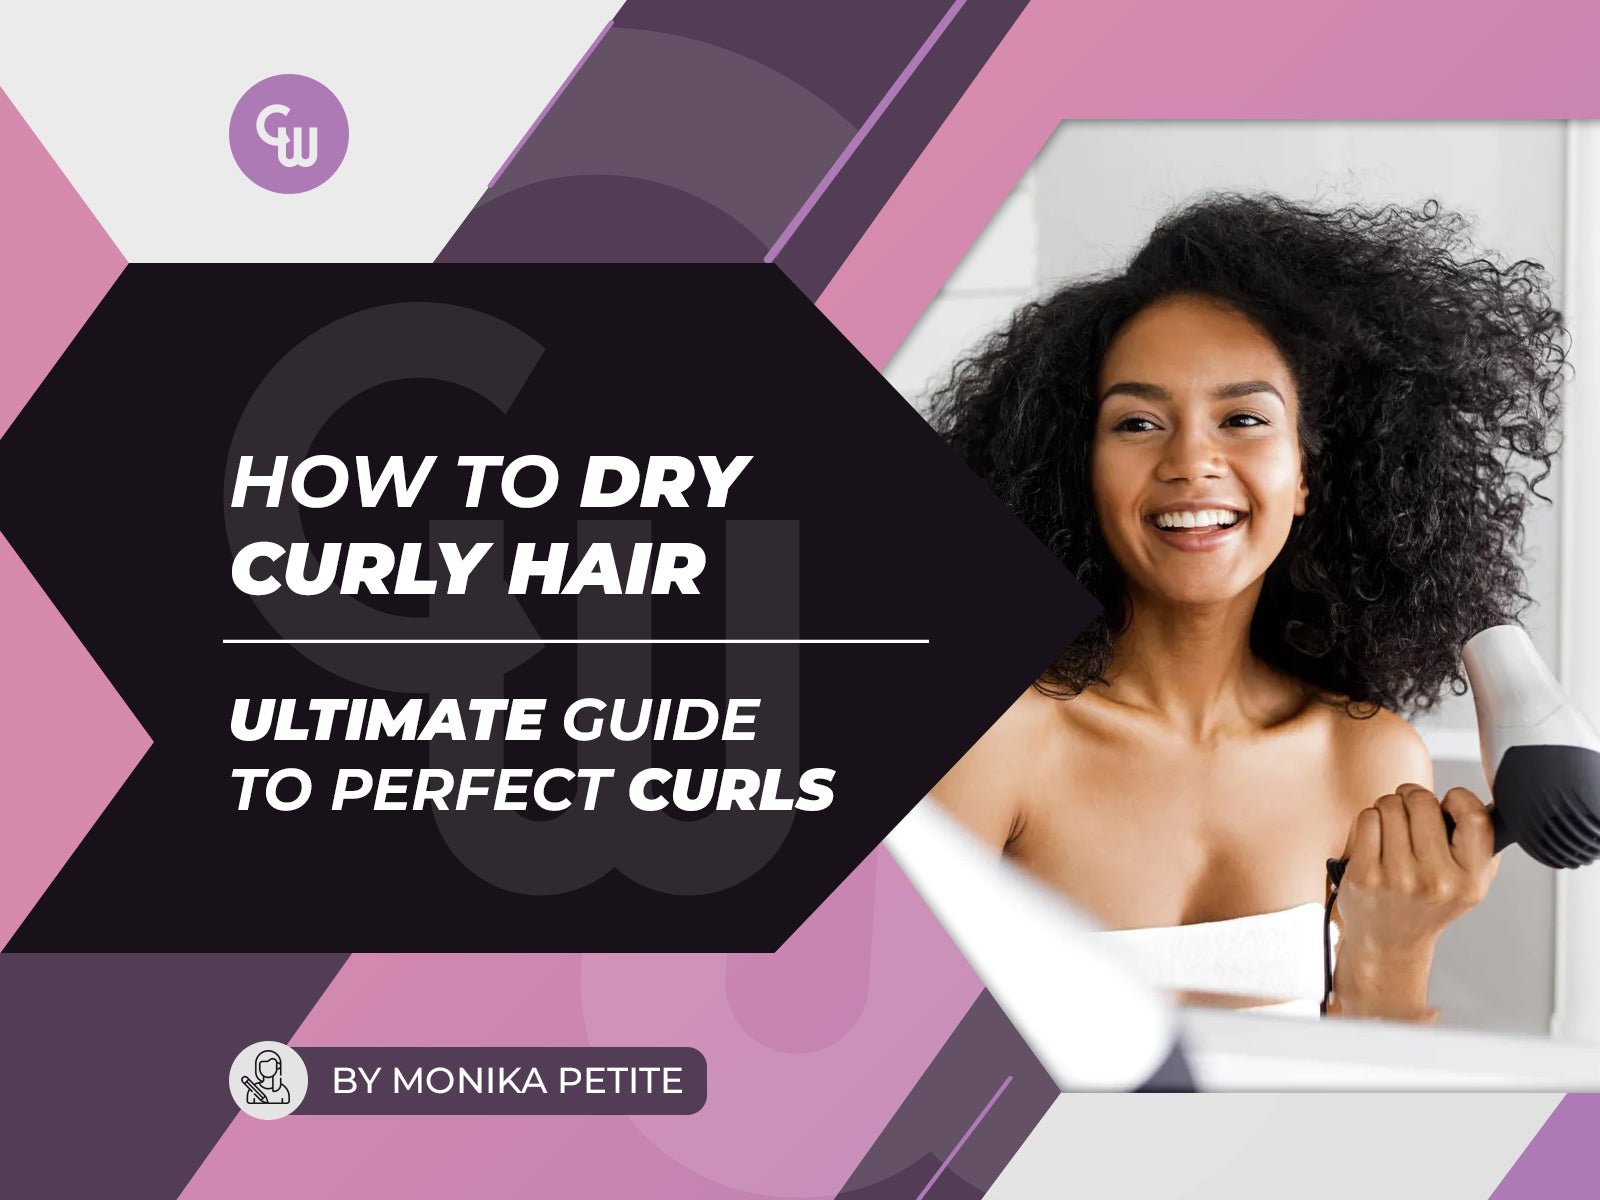 Hair Plopping Is the Easiest Way to Dry Your Curly Hair